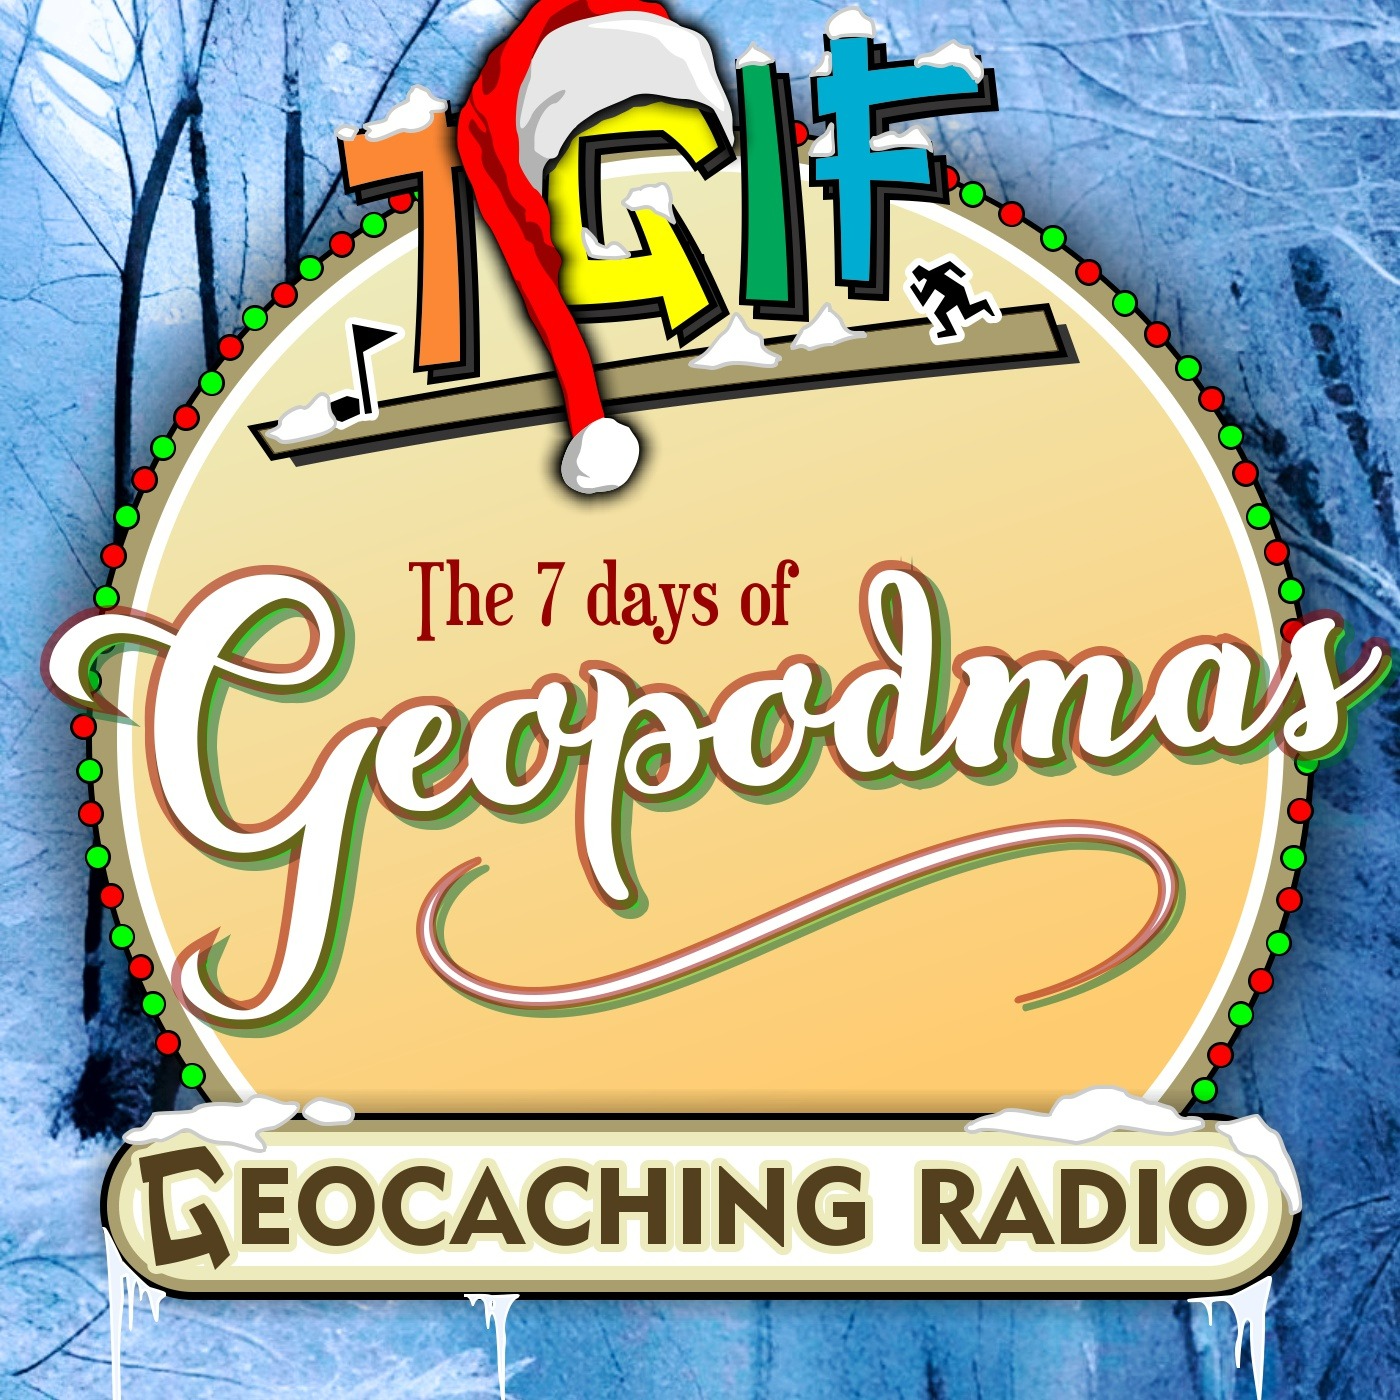 Geopodmas (Day 8?) Just One More